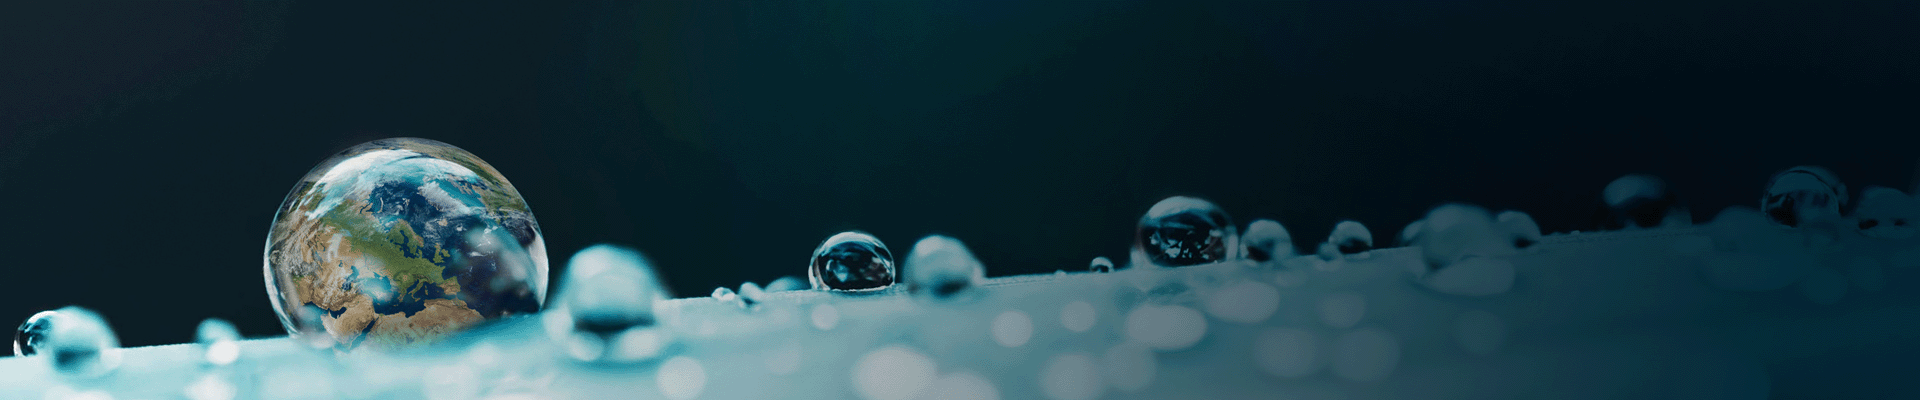 Water drops and earth